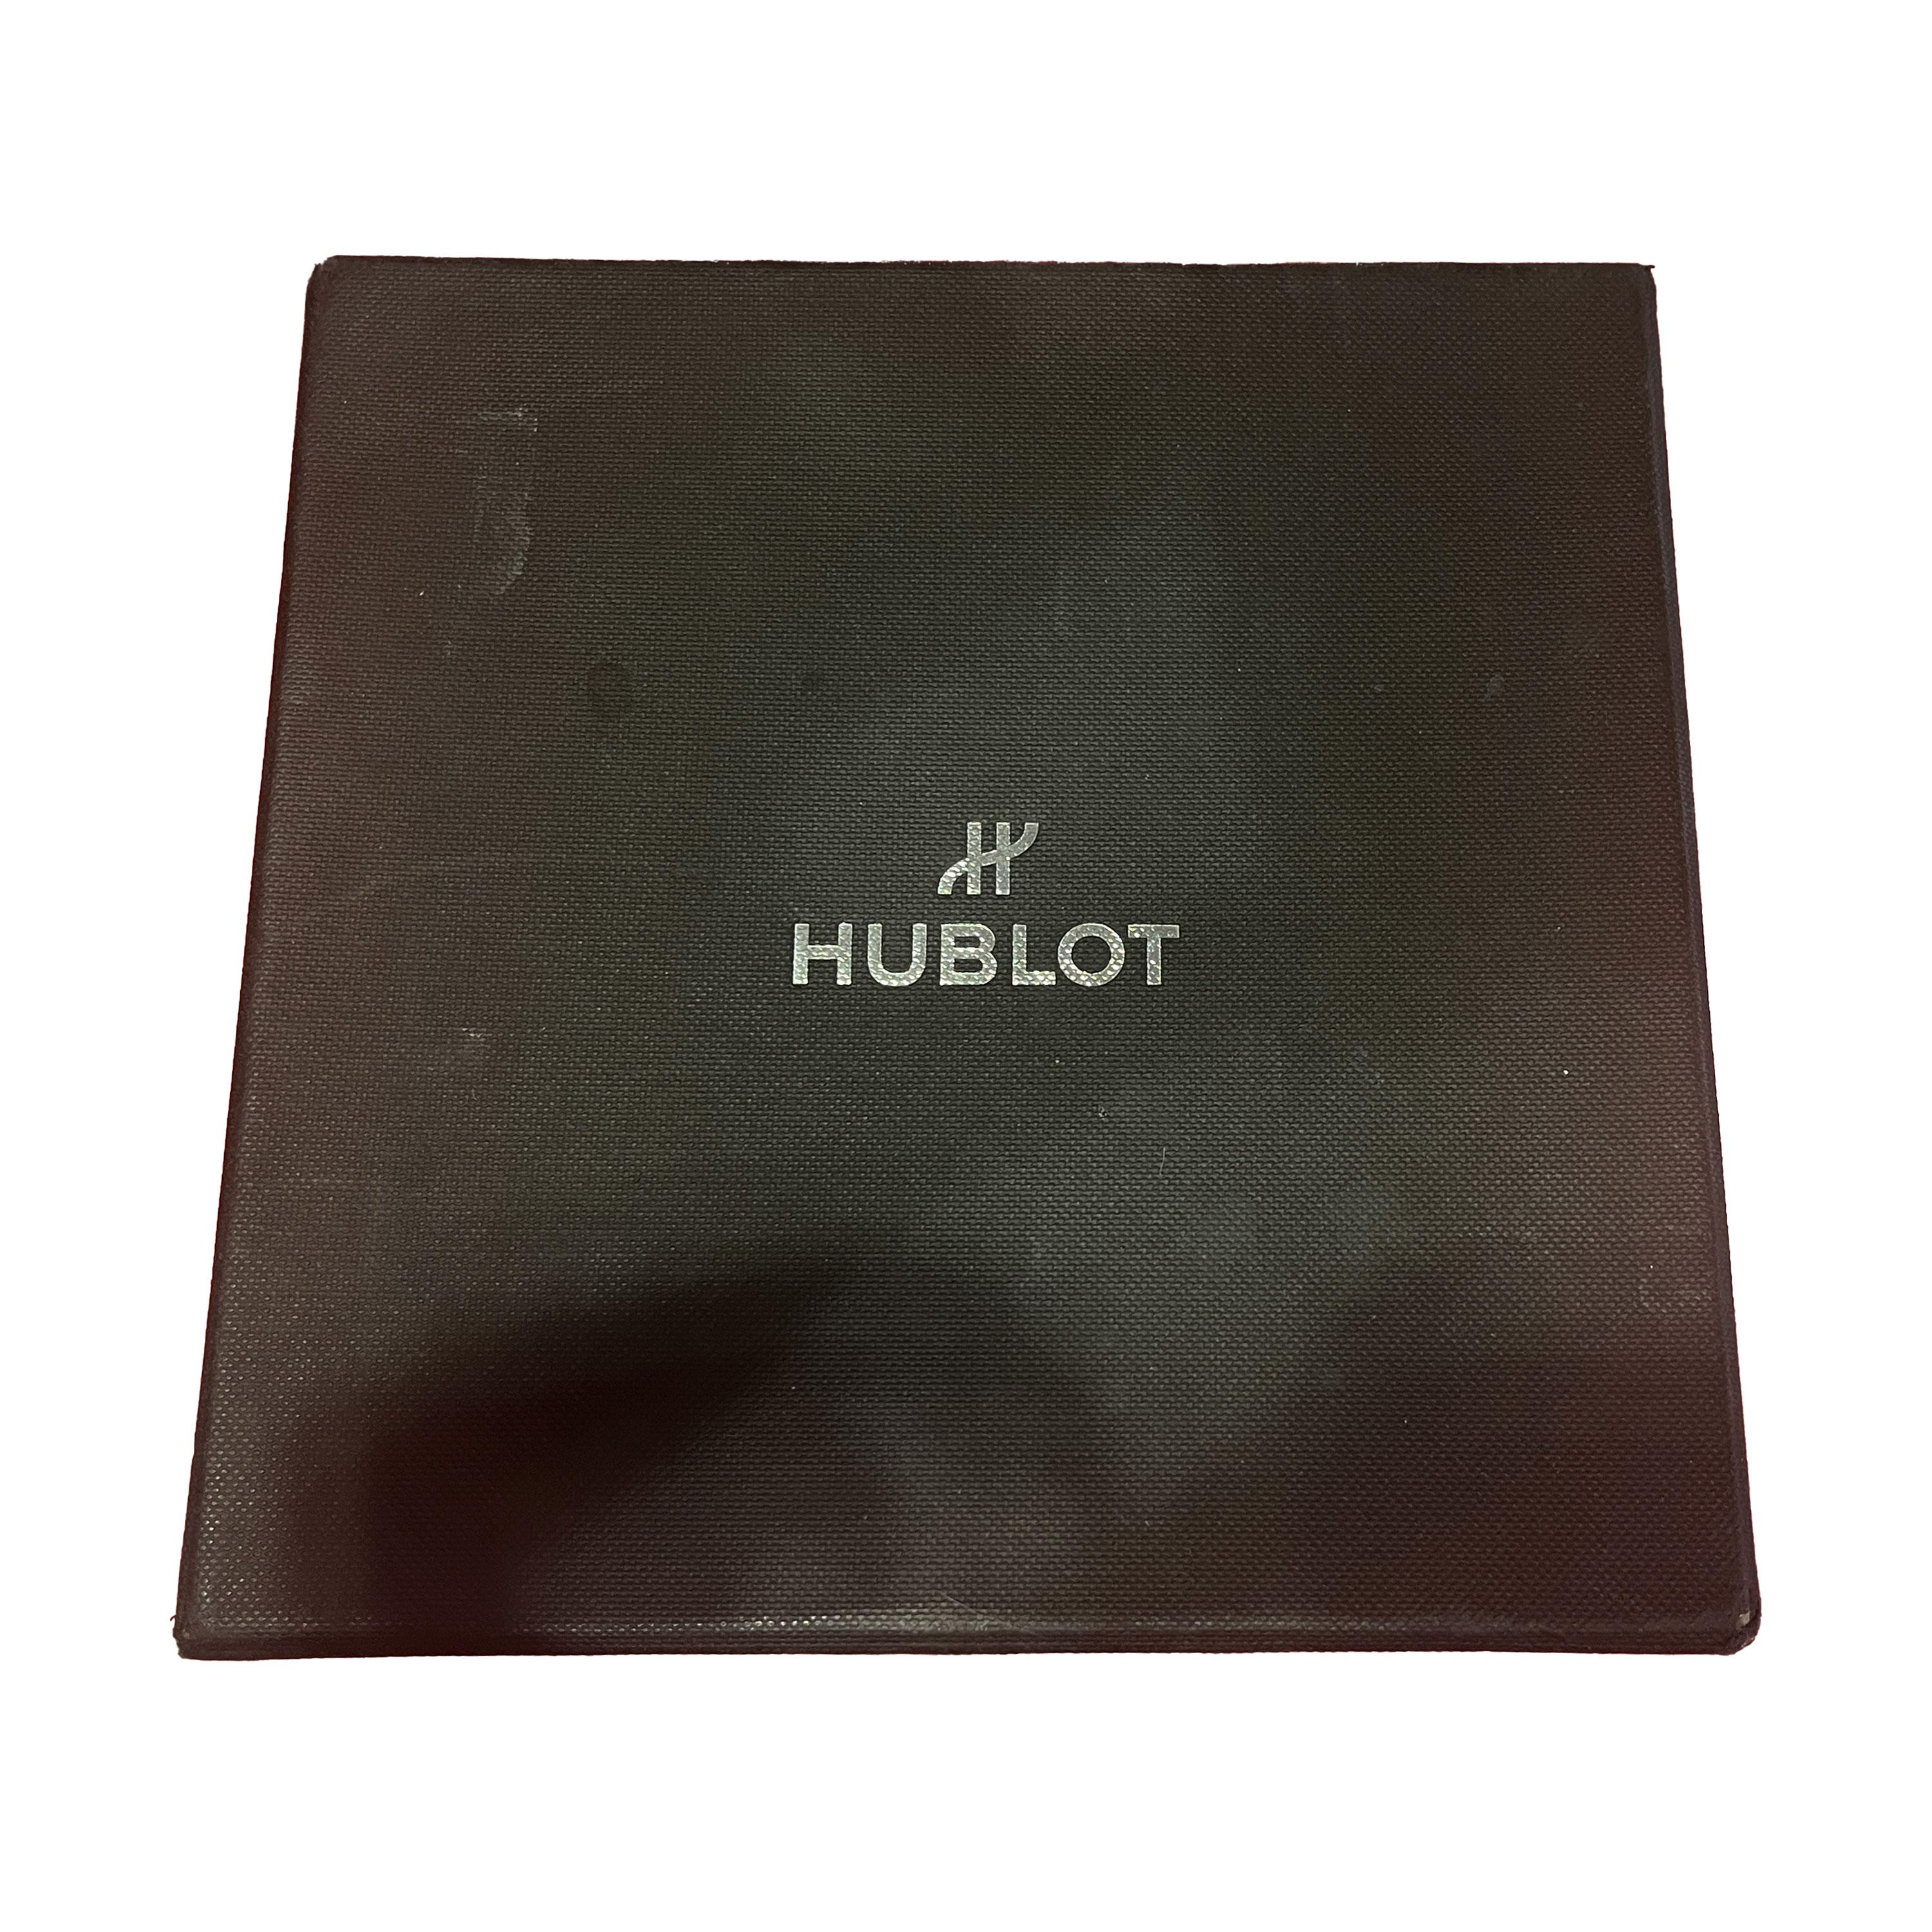 hublot is from which country